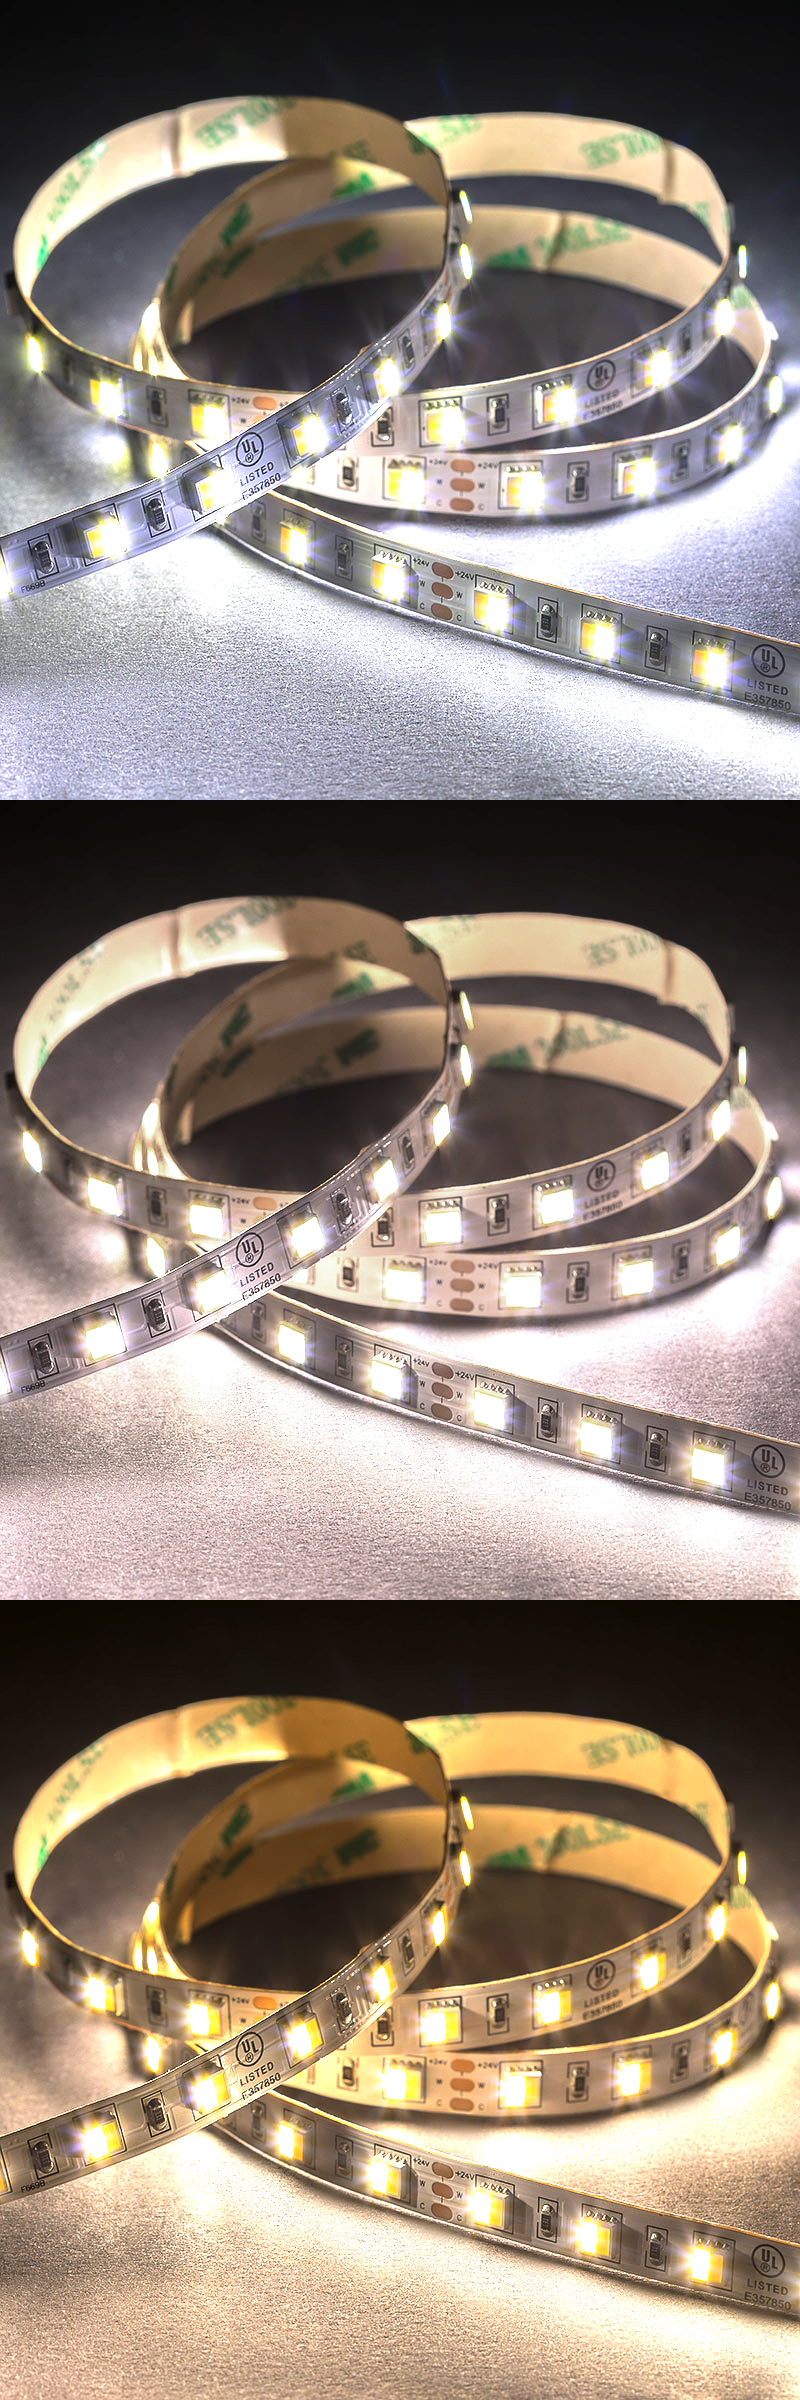 5m Tunable White LED Strip Light - 2-in-1 Color-Changing LED Tape Light - 24V - IP20 - Tunable White - 196.9in (16.40ft)